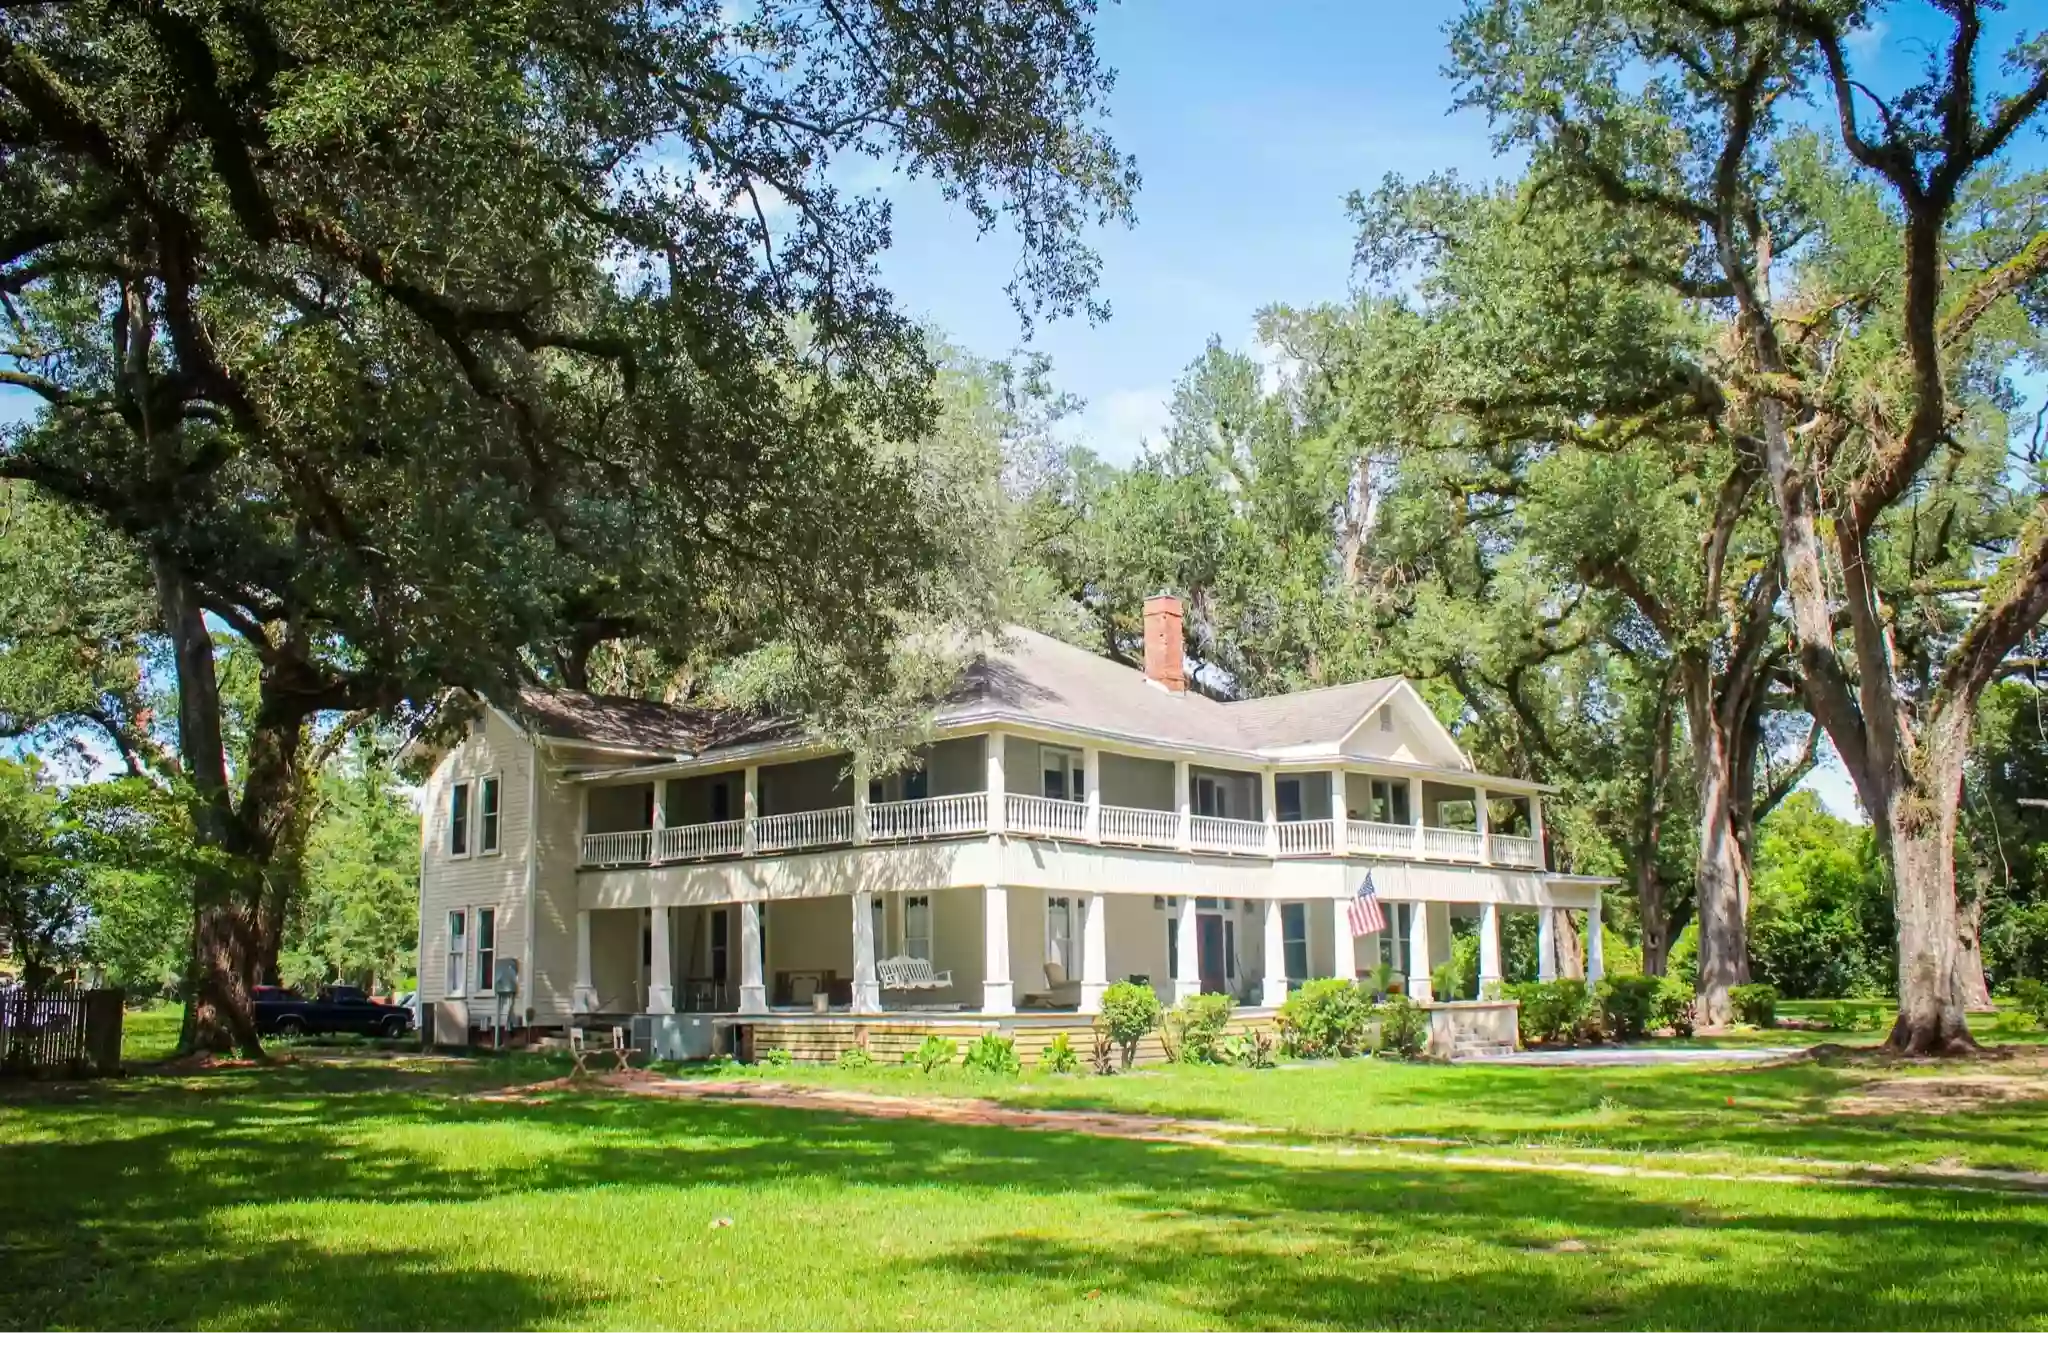 The Willis House at Greenwood Oaks Manor